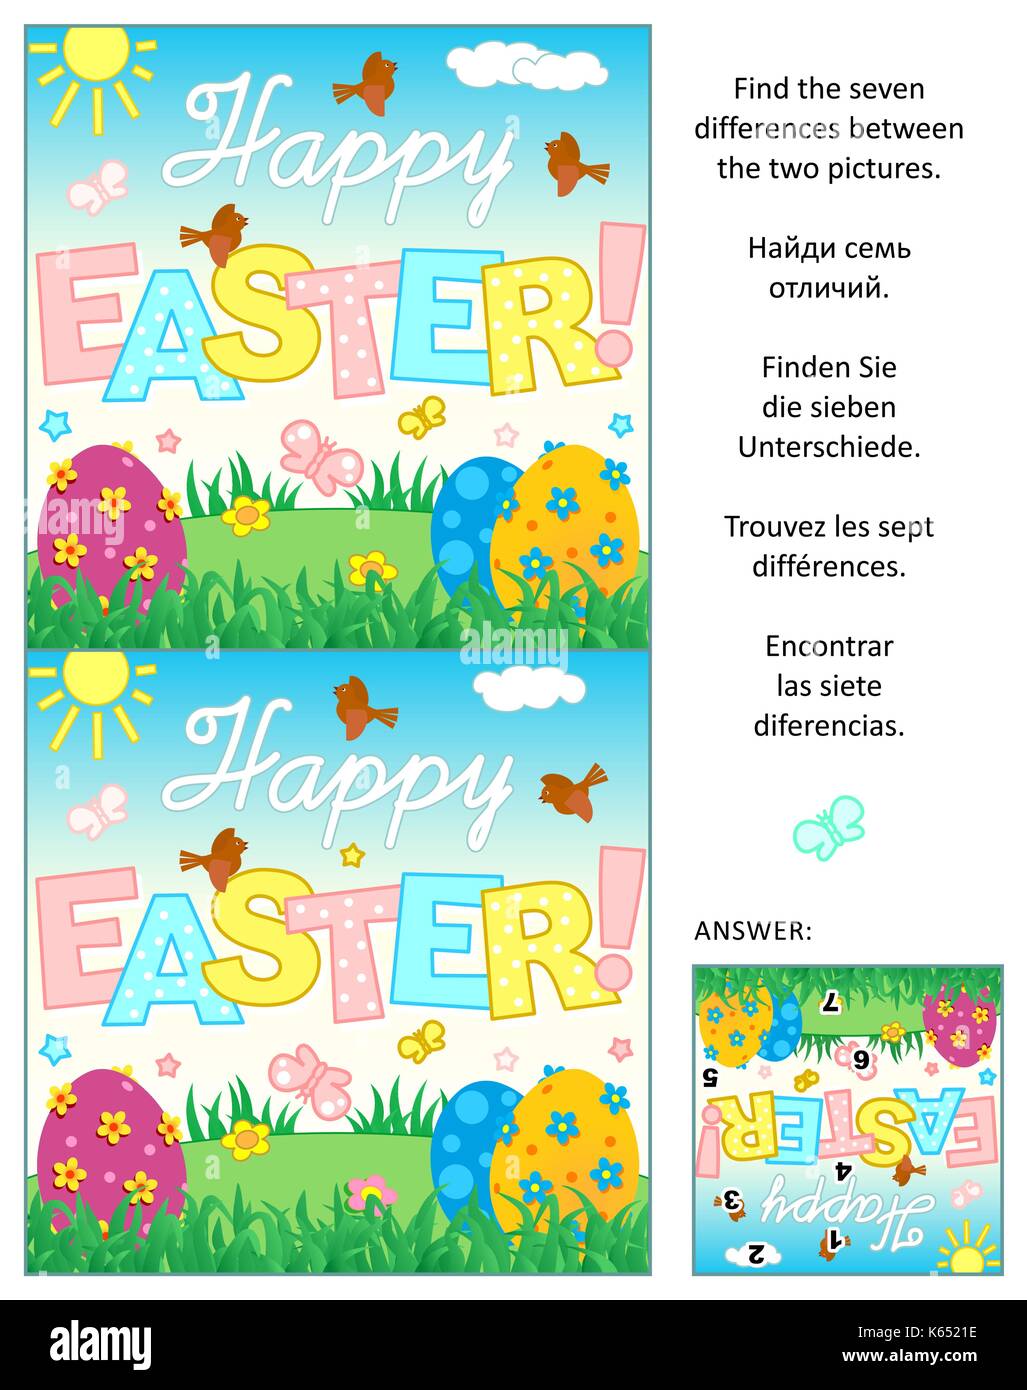 Picture puzzle: Find the seven differences between the two Easter greeting cards. Answer included. Stock Vector